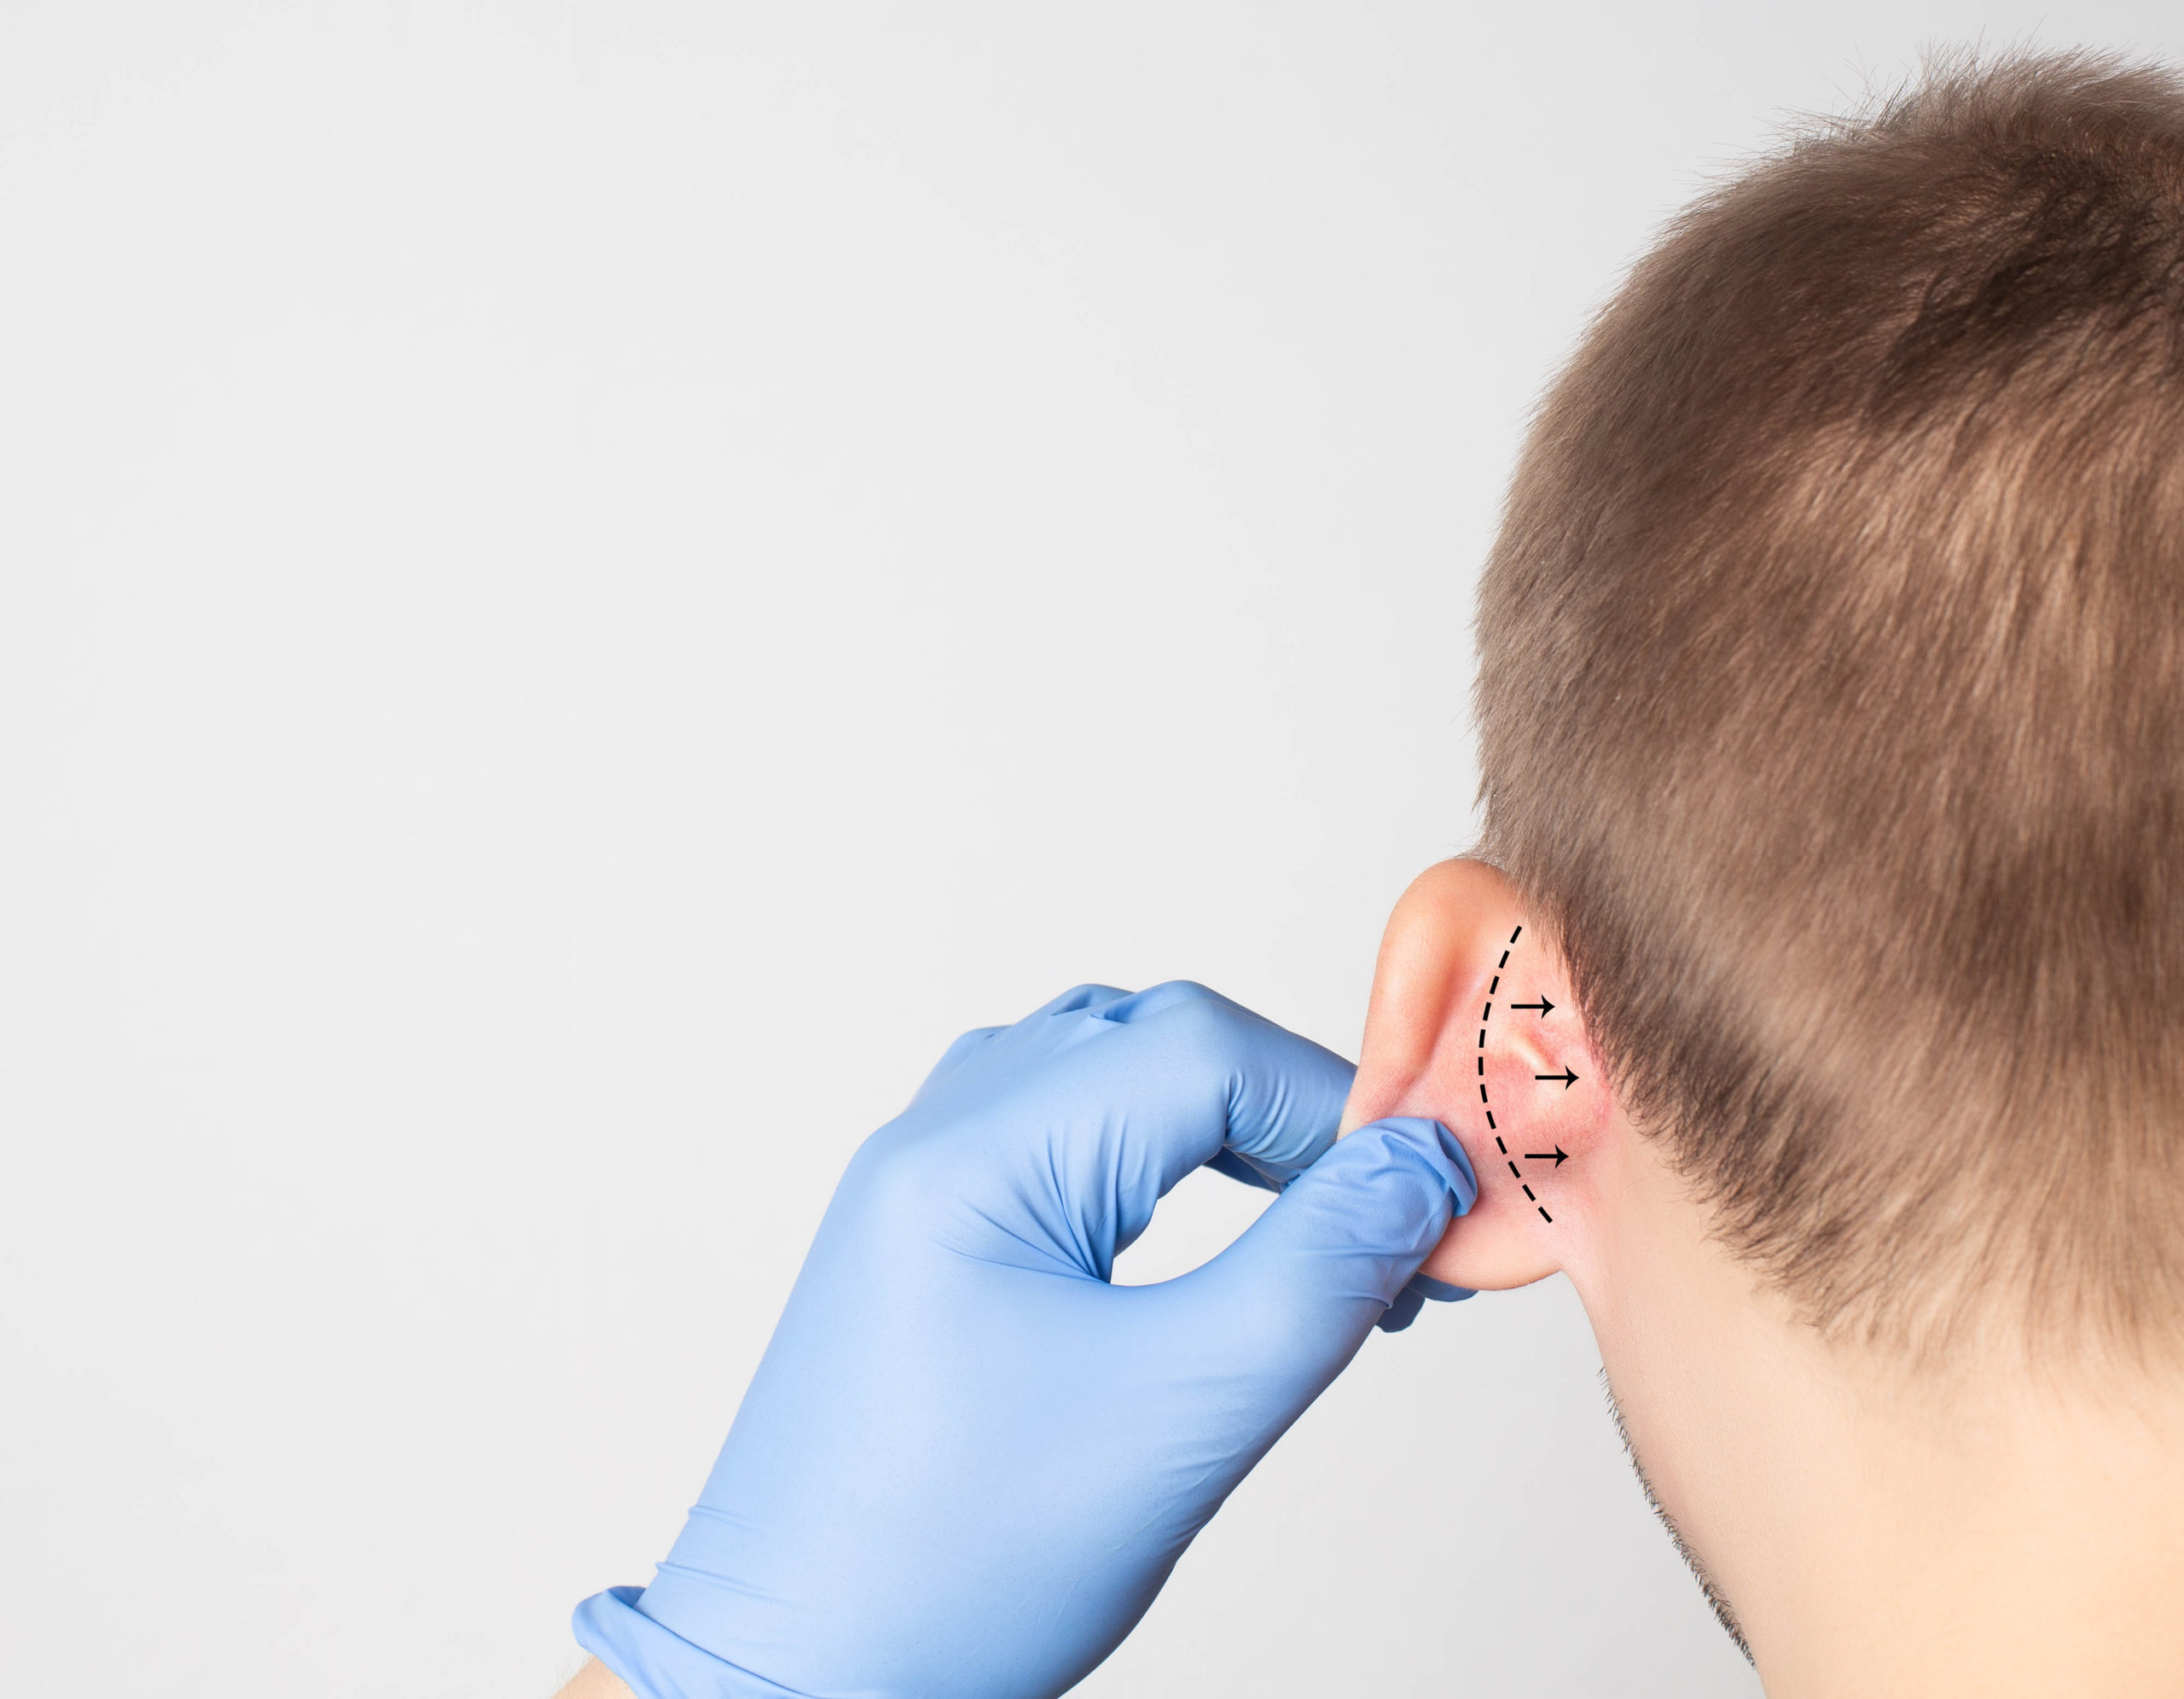 A plastic surgeon doctor examines a male patient s ear for an otoplasty operation - Ear Pinning Surgery